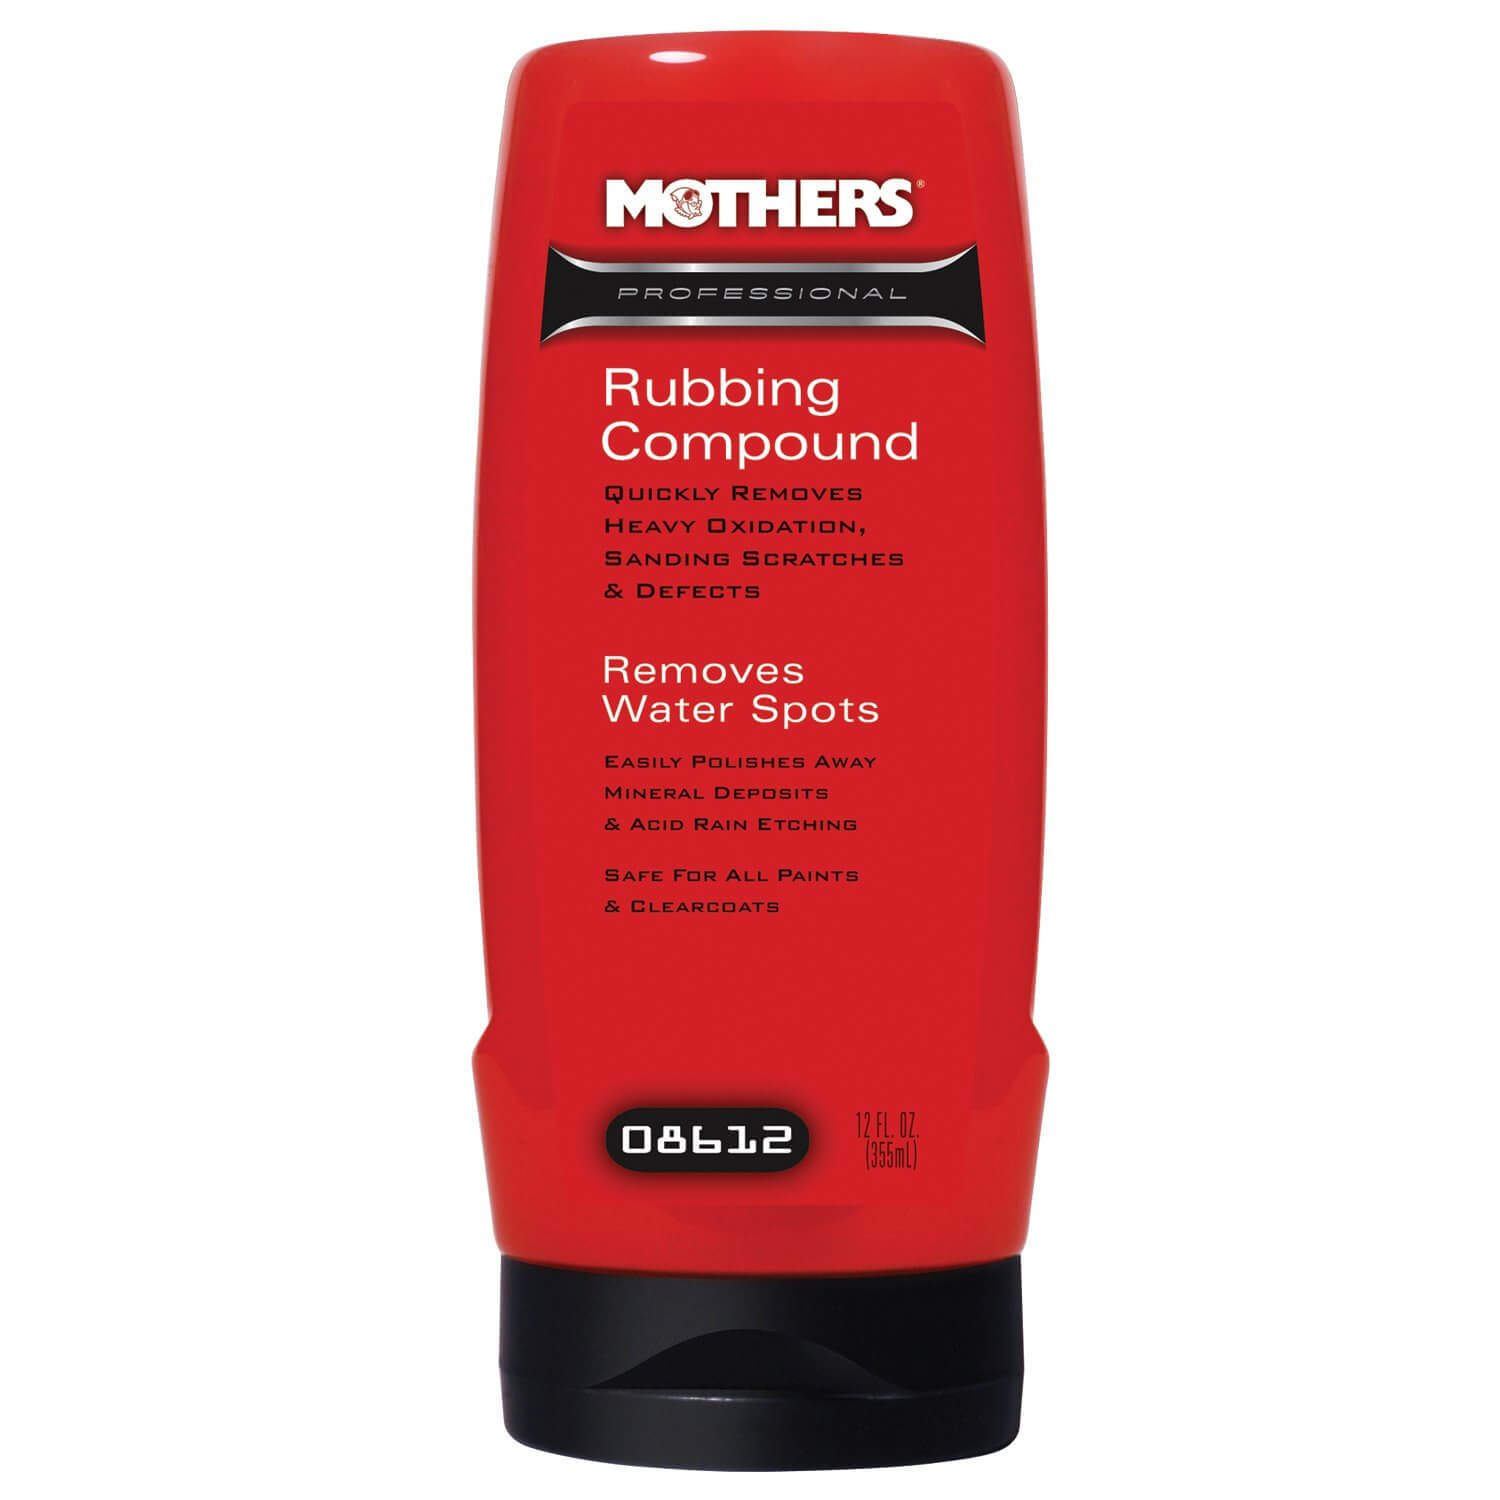 Mothers 08612 Professional Rubbing Compound